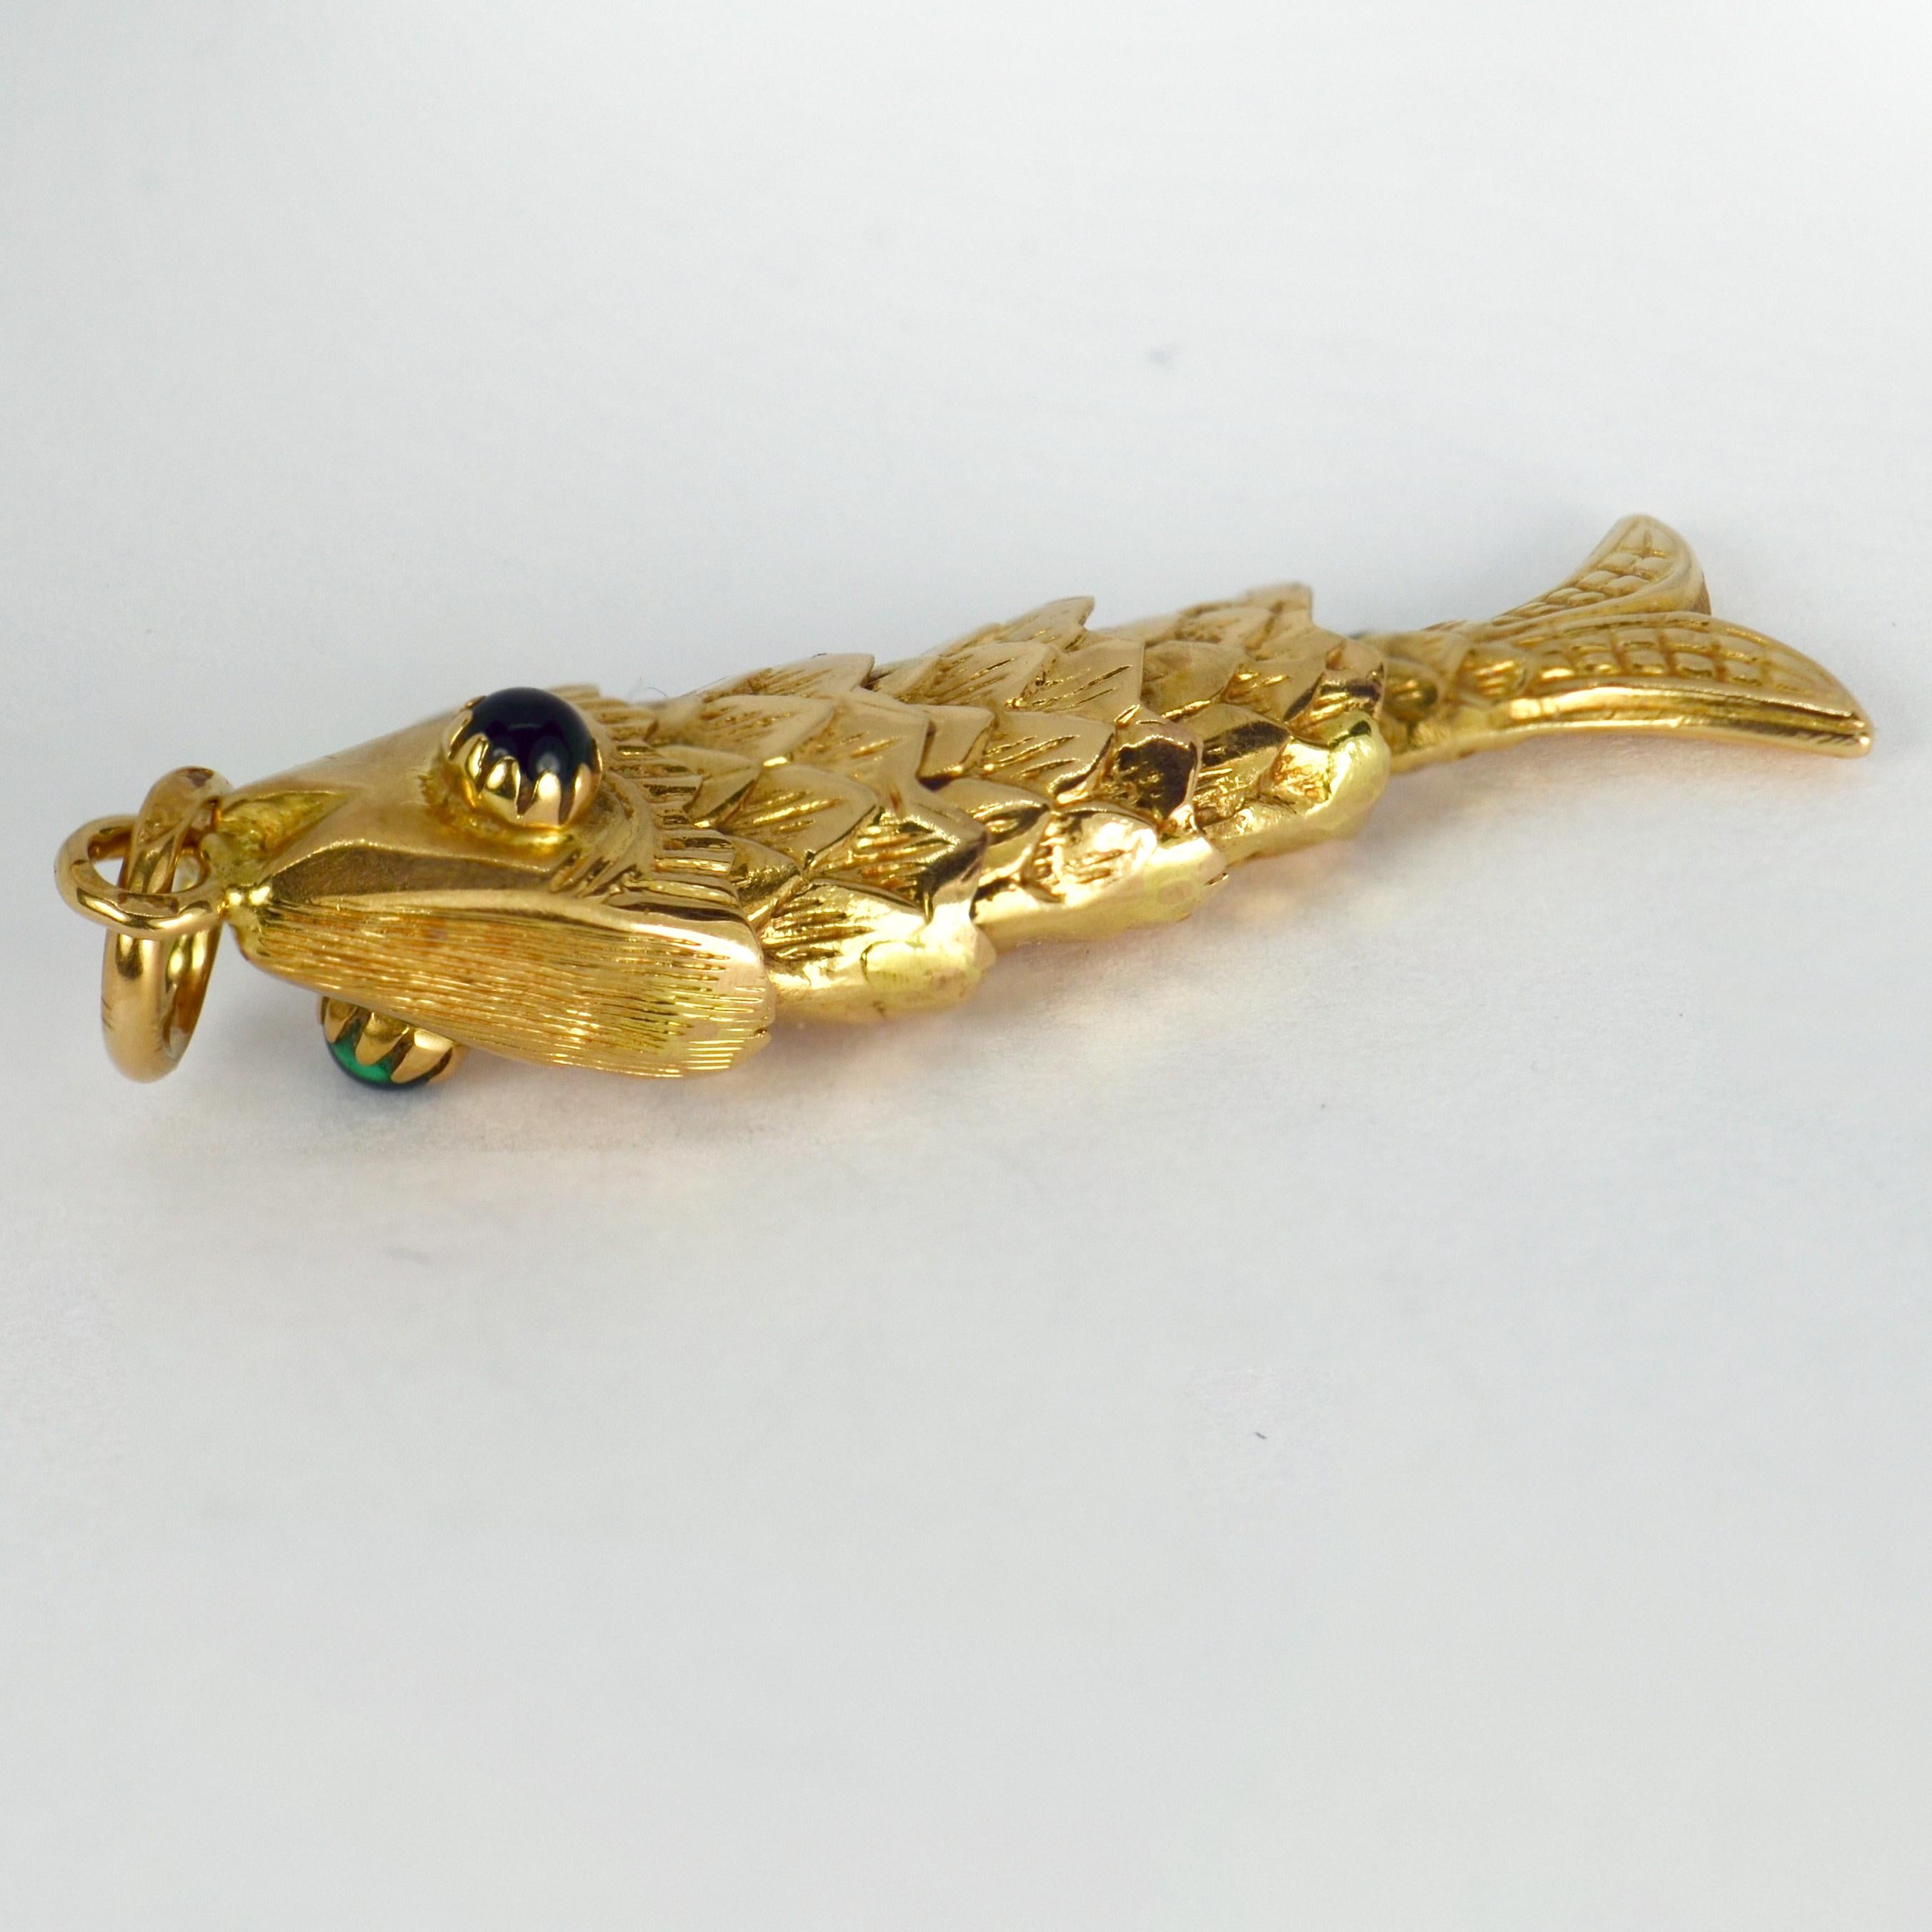 A large 18 karat (18K) yellow gold charm pendant designed as an articulated fish with foiled green paste eyes. Stamped with French import marks and 750 for 18 karat gold.

Dimensions: 4.3 x 1.05 x 1 cm (not including jump ring)
Weight: 4.79 grams
